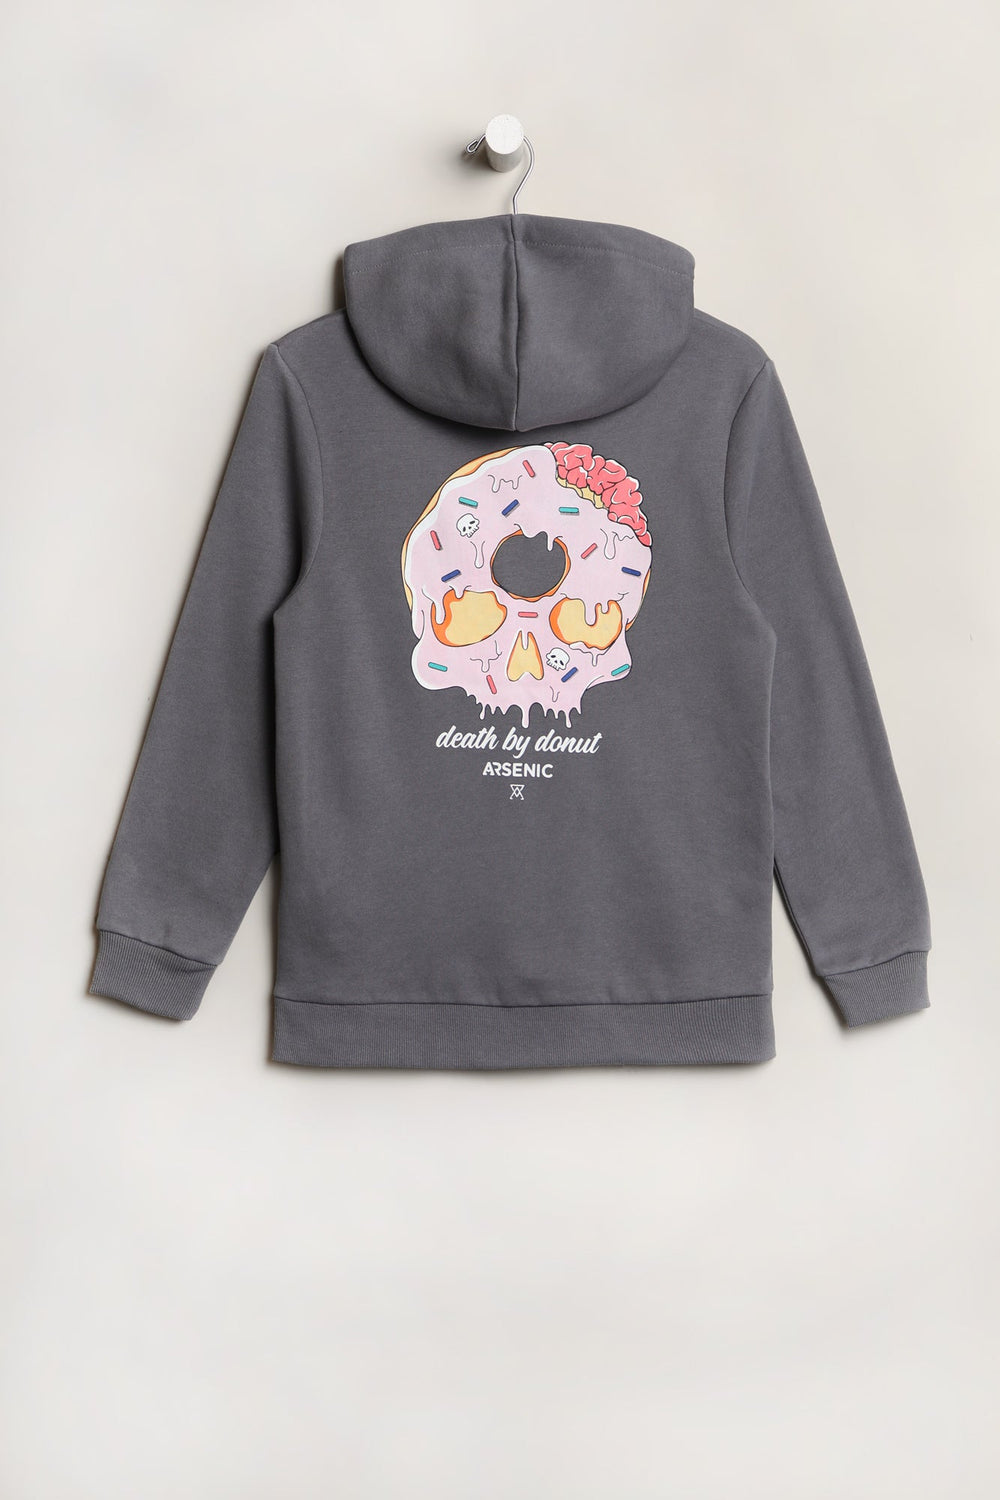 Arsenic Youth Death By Donut Hoodie Arsenic Youth Death By Donut Hoodie